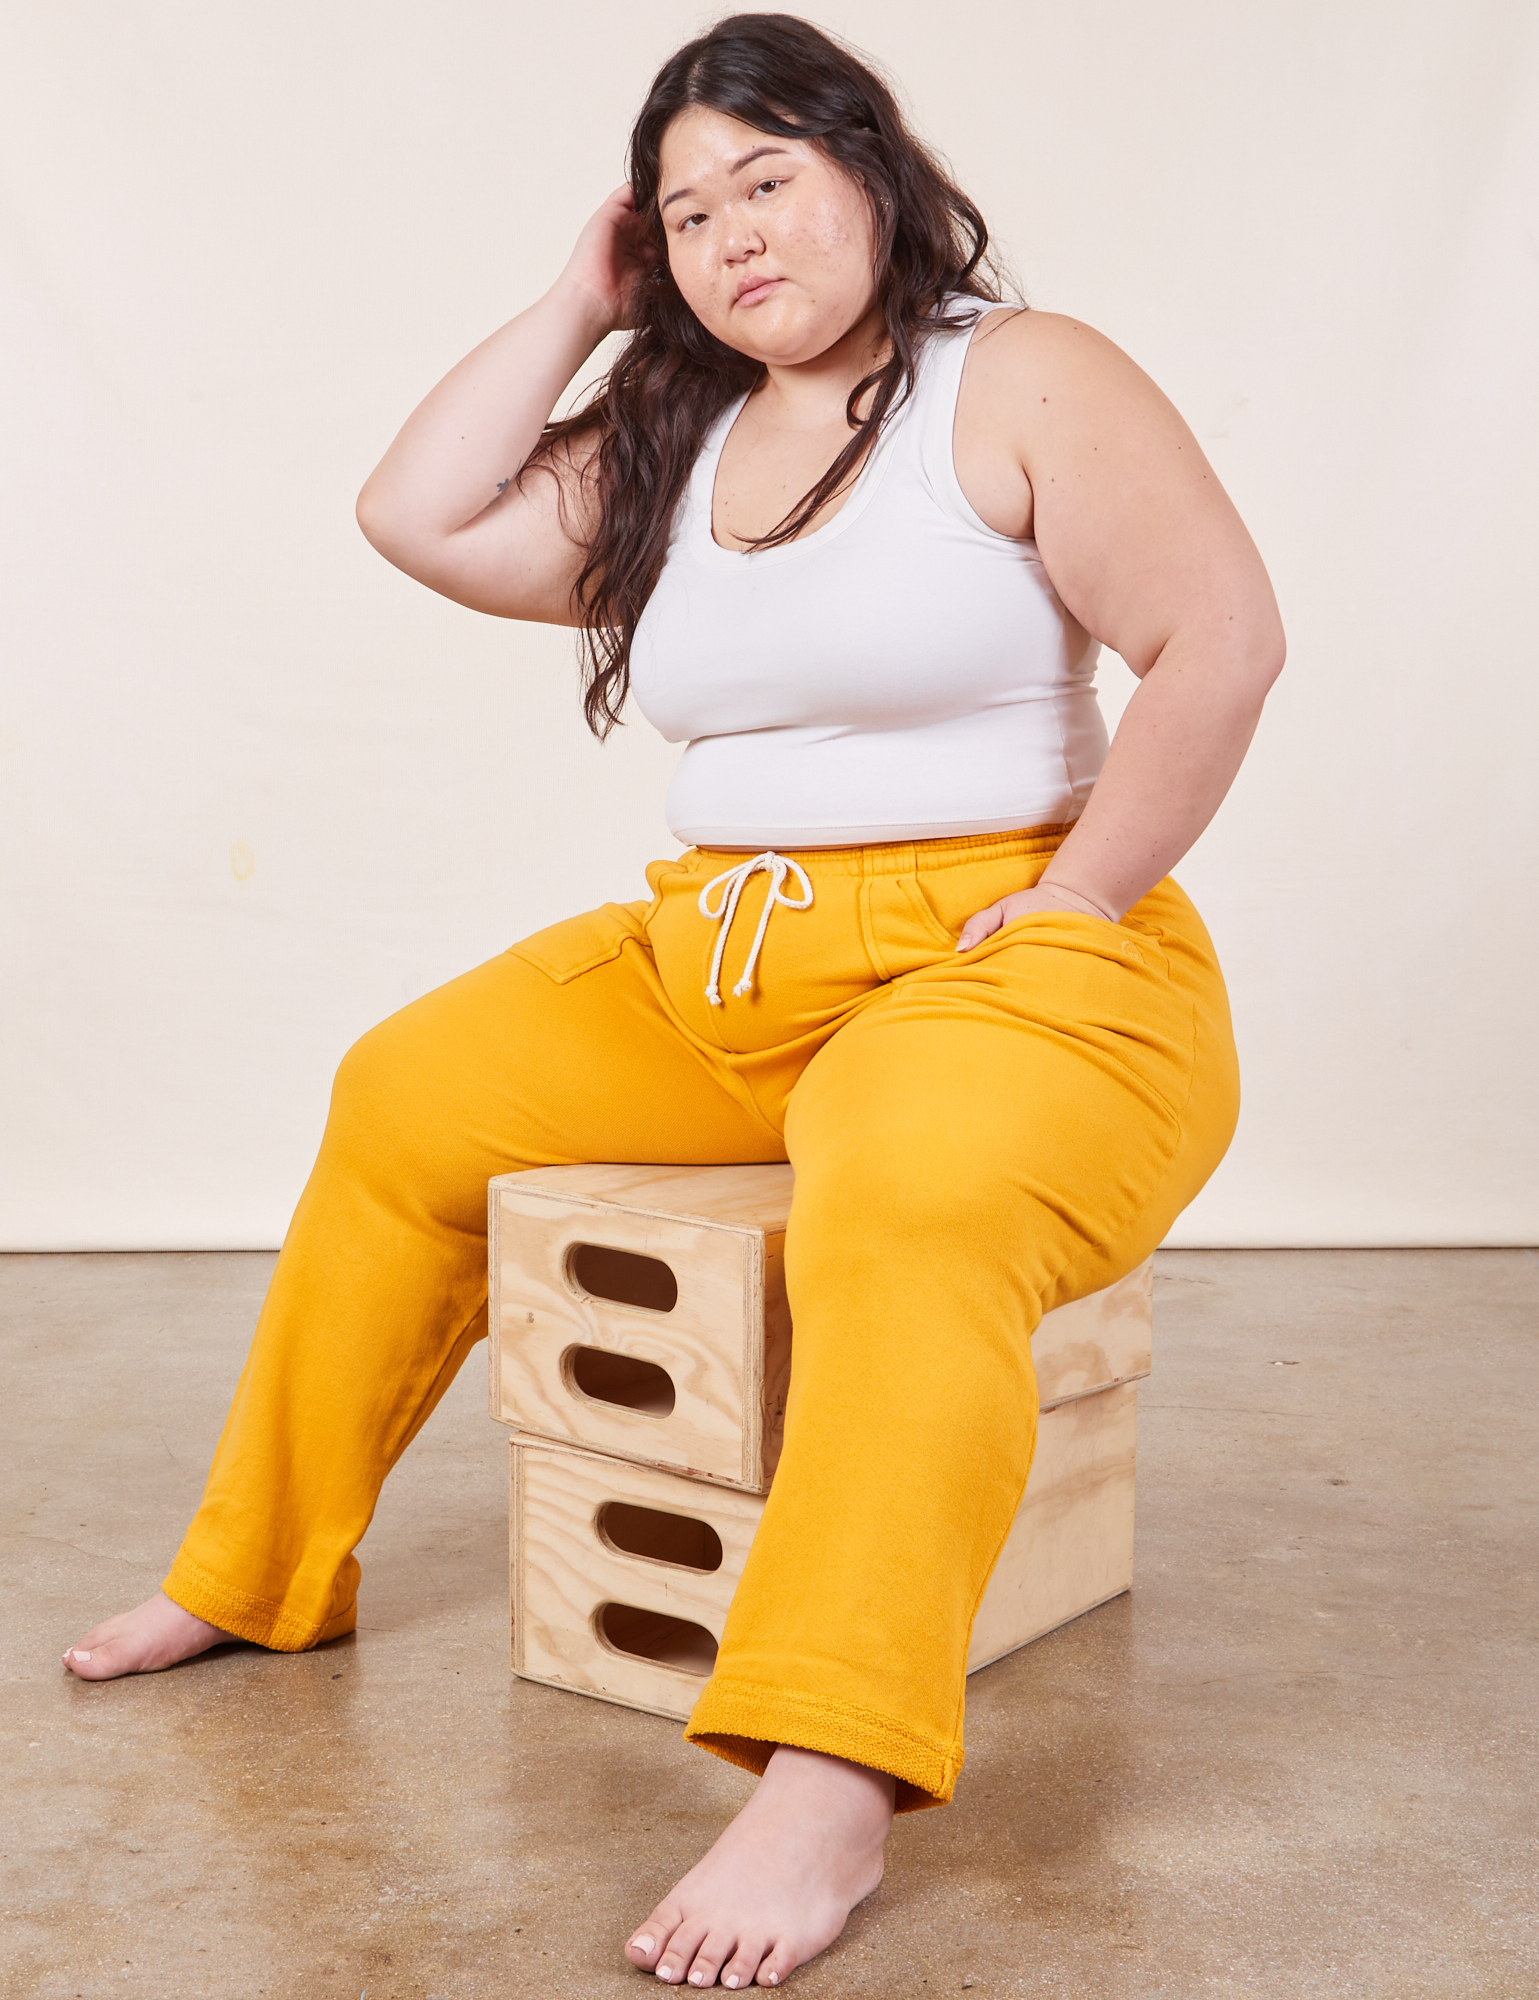 Ashley is wearing Cropped Rolled Cuff Sweatpants in Mustard Yellow and vintage off-white Cropped Tank Top